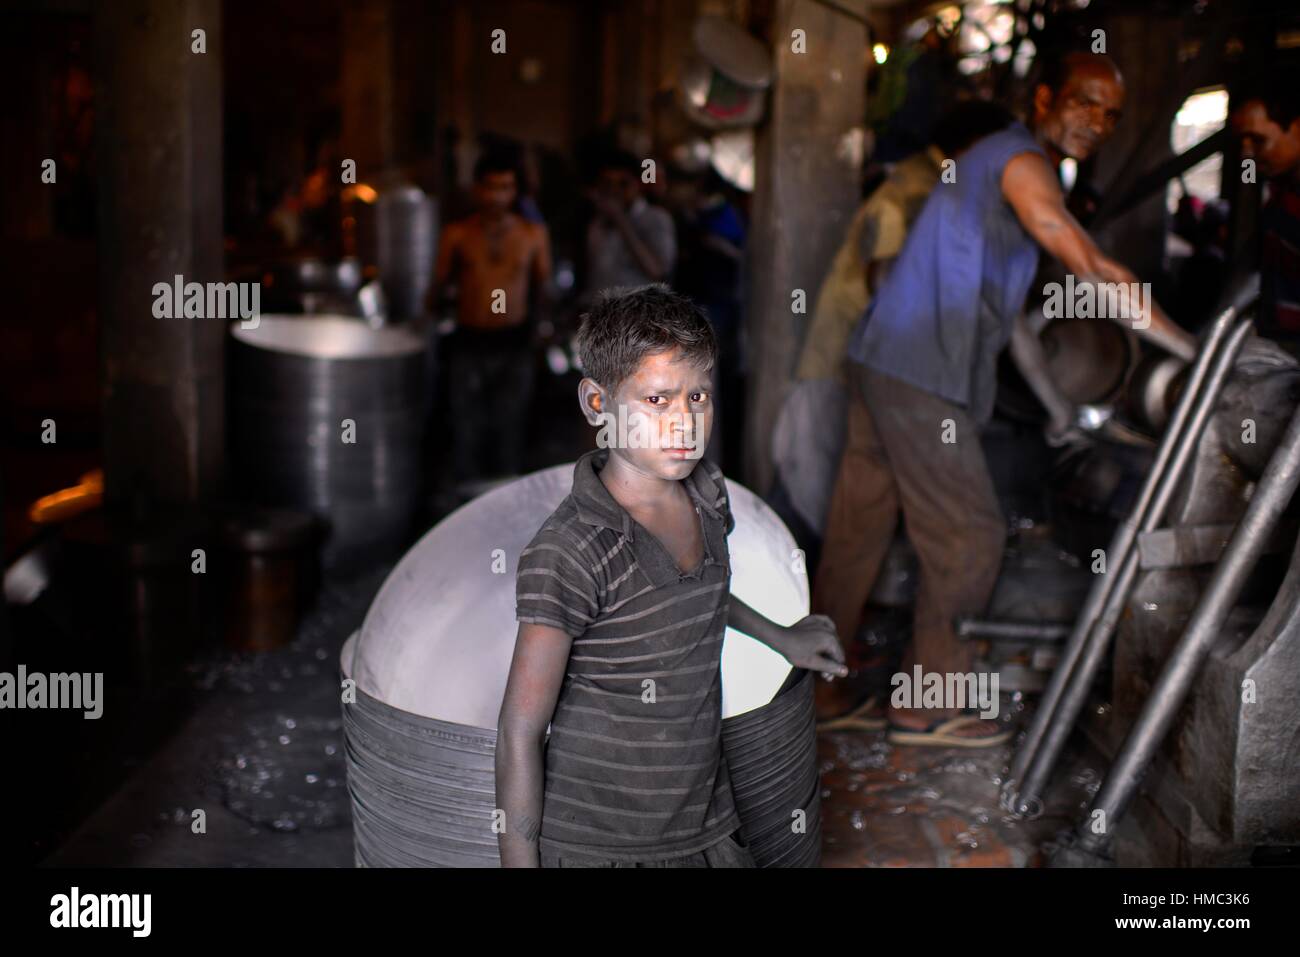 Portrait a Bnagladeshi child labor who work in a silver cooking pot factory in Dhaka. Children as young as teen operate heavy machinery unaided, Stock Photo